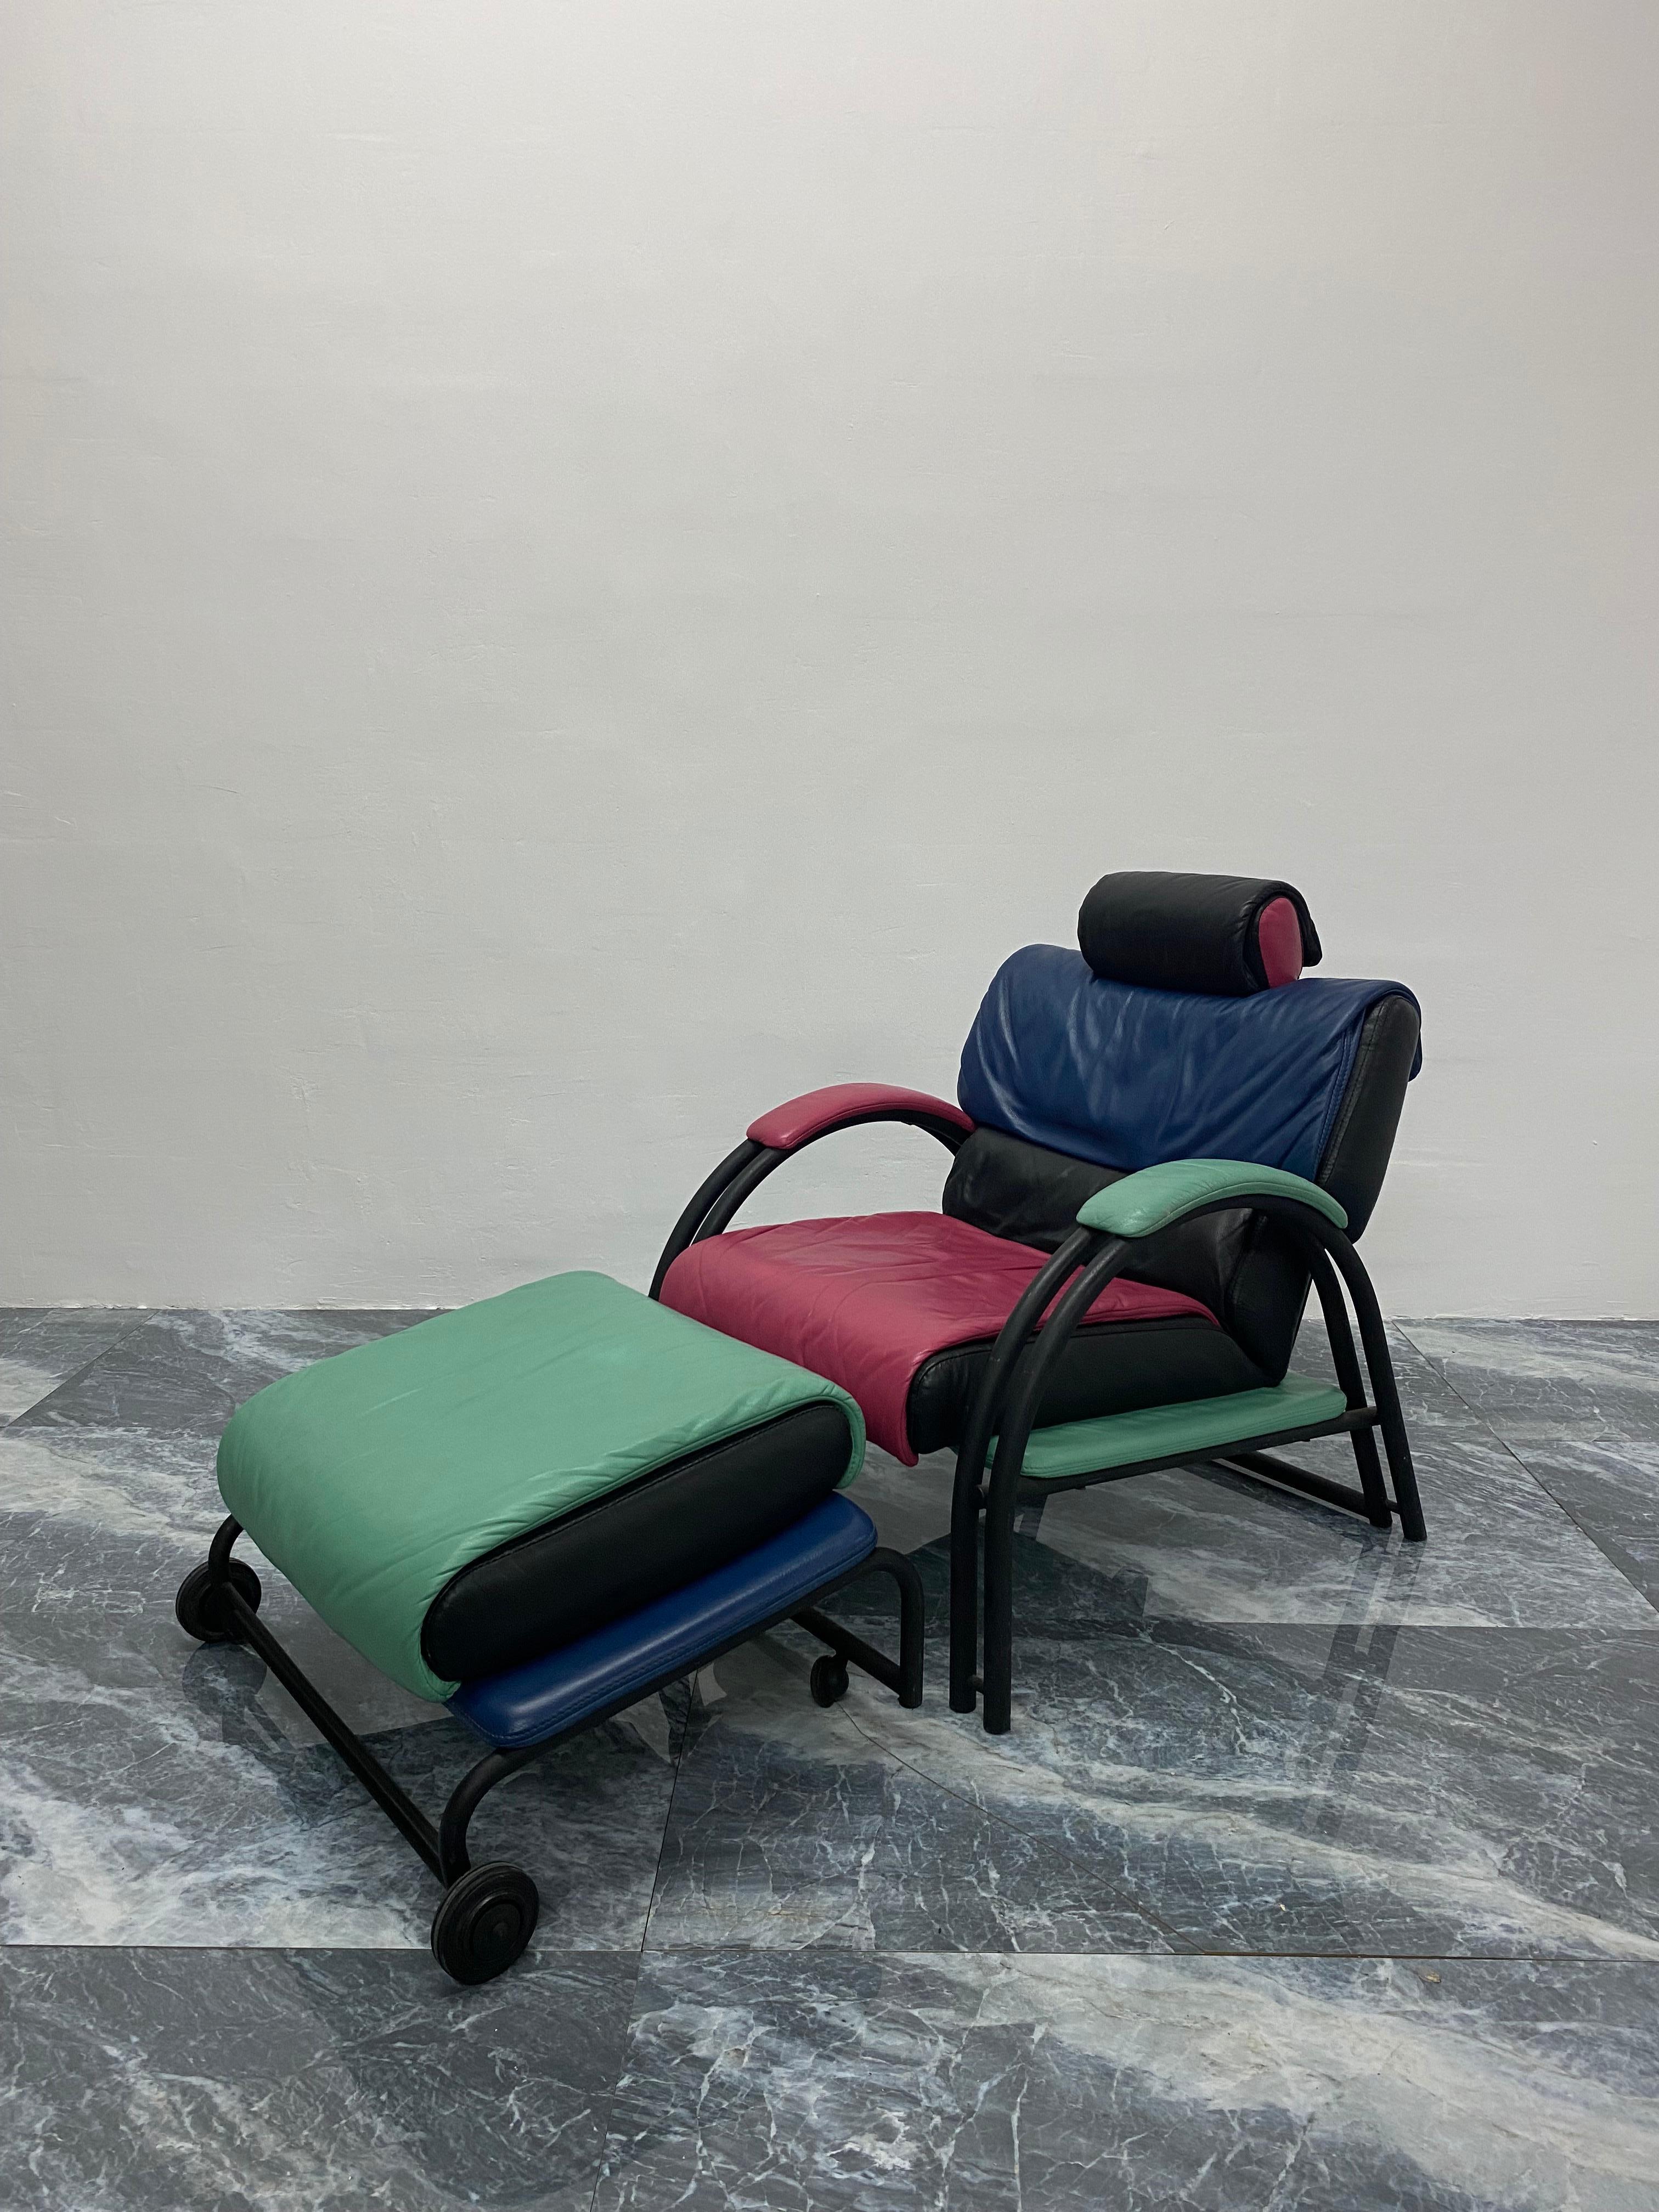 Custom reclining lounge chair and ottoman using matte black tubular steel frame and leather upholstery produced in Italy, 1980s. The lounge chair reclines using a lever on the side connected to a steel cable. Extremely comfortable